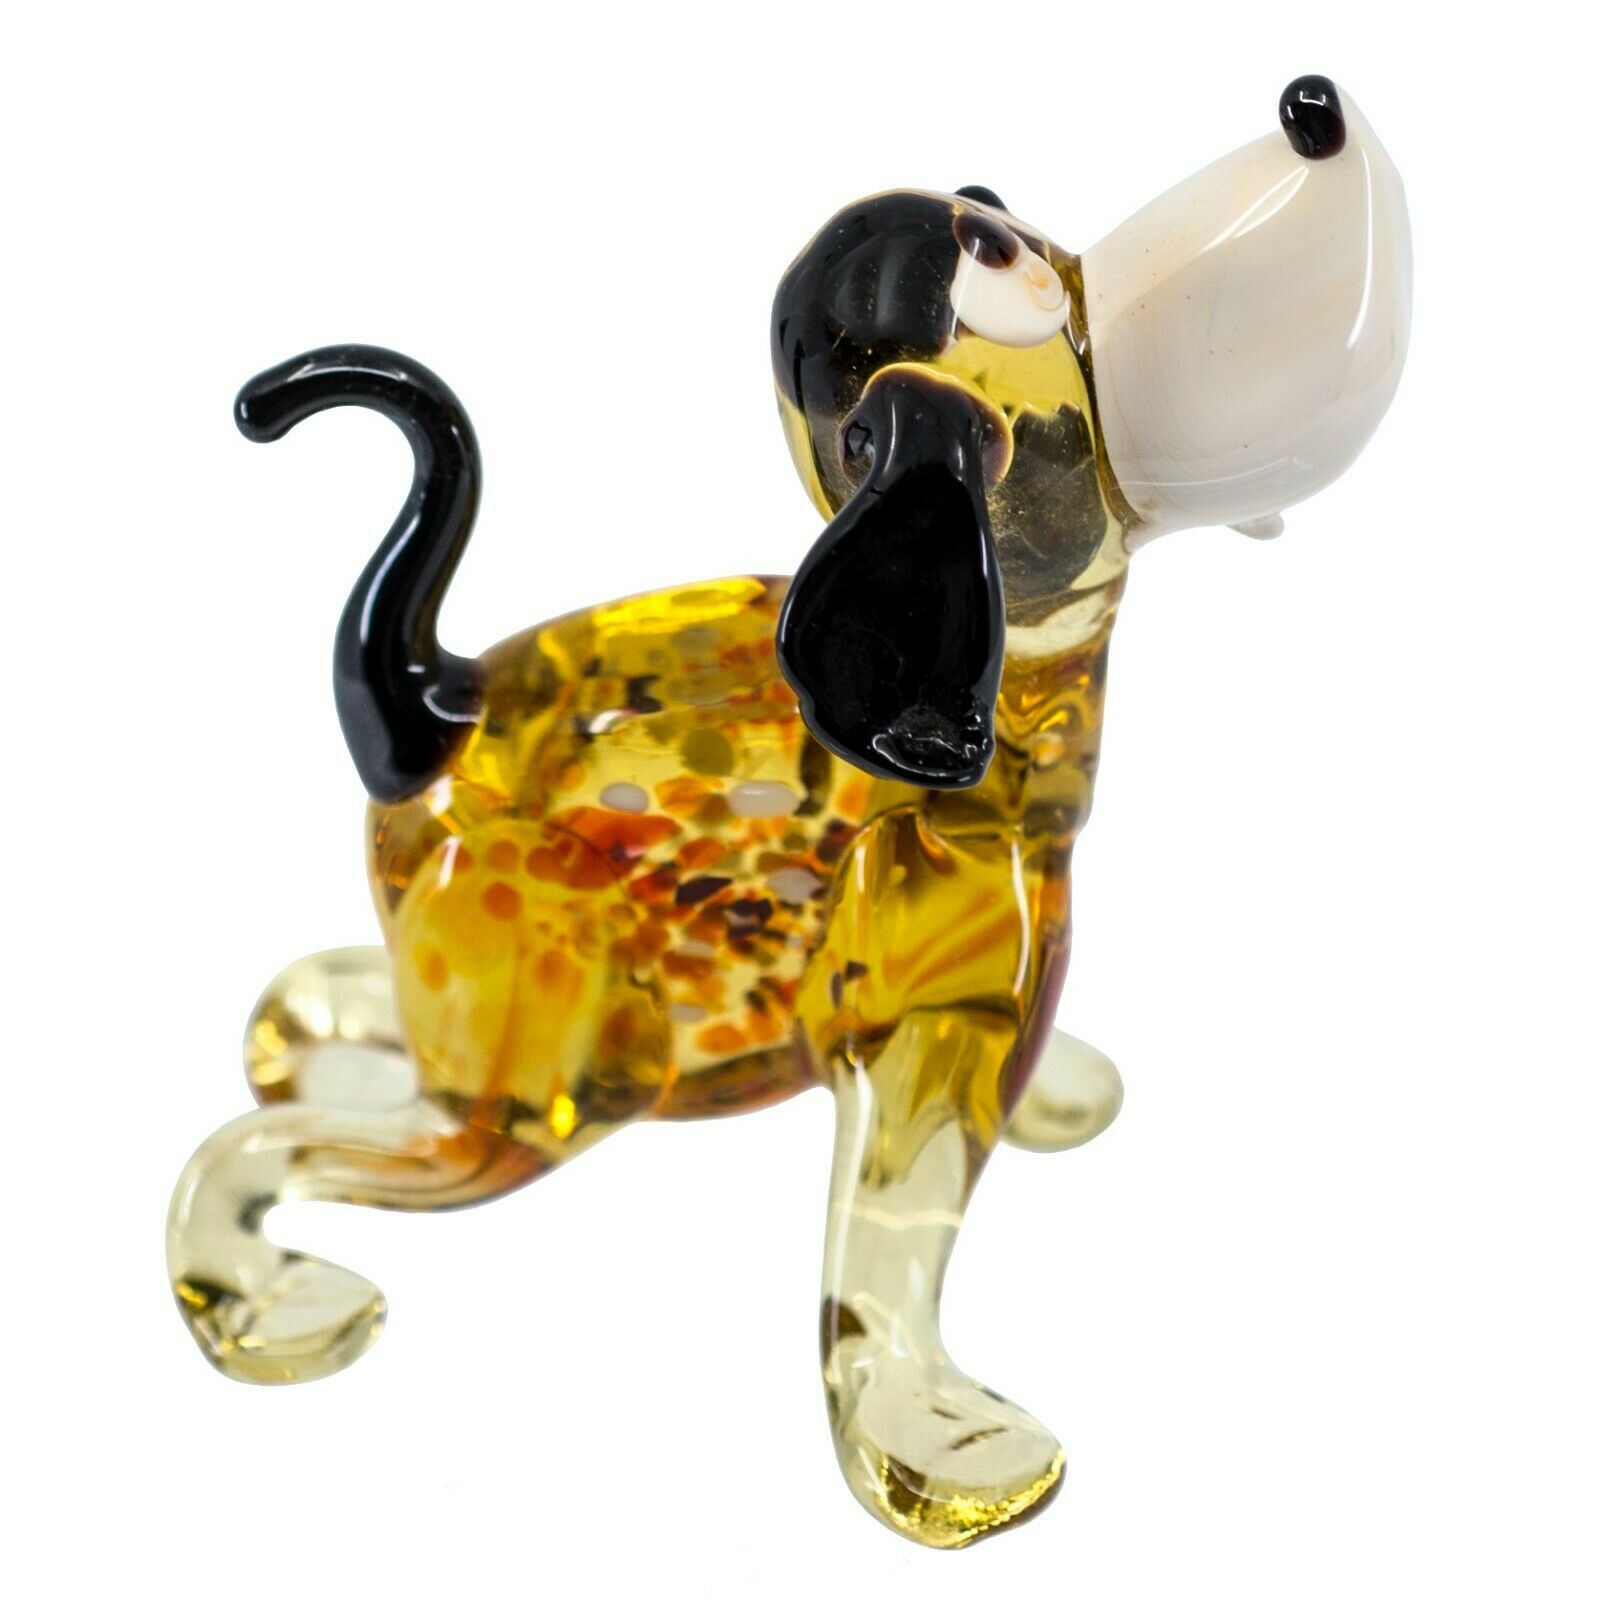 Lampwork Hand Blown Glass Amber & White Spotted Dog Figurine 2.75